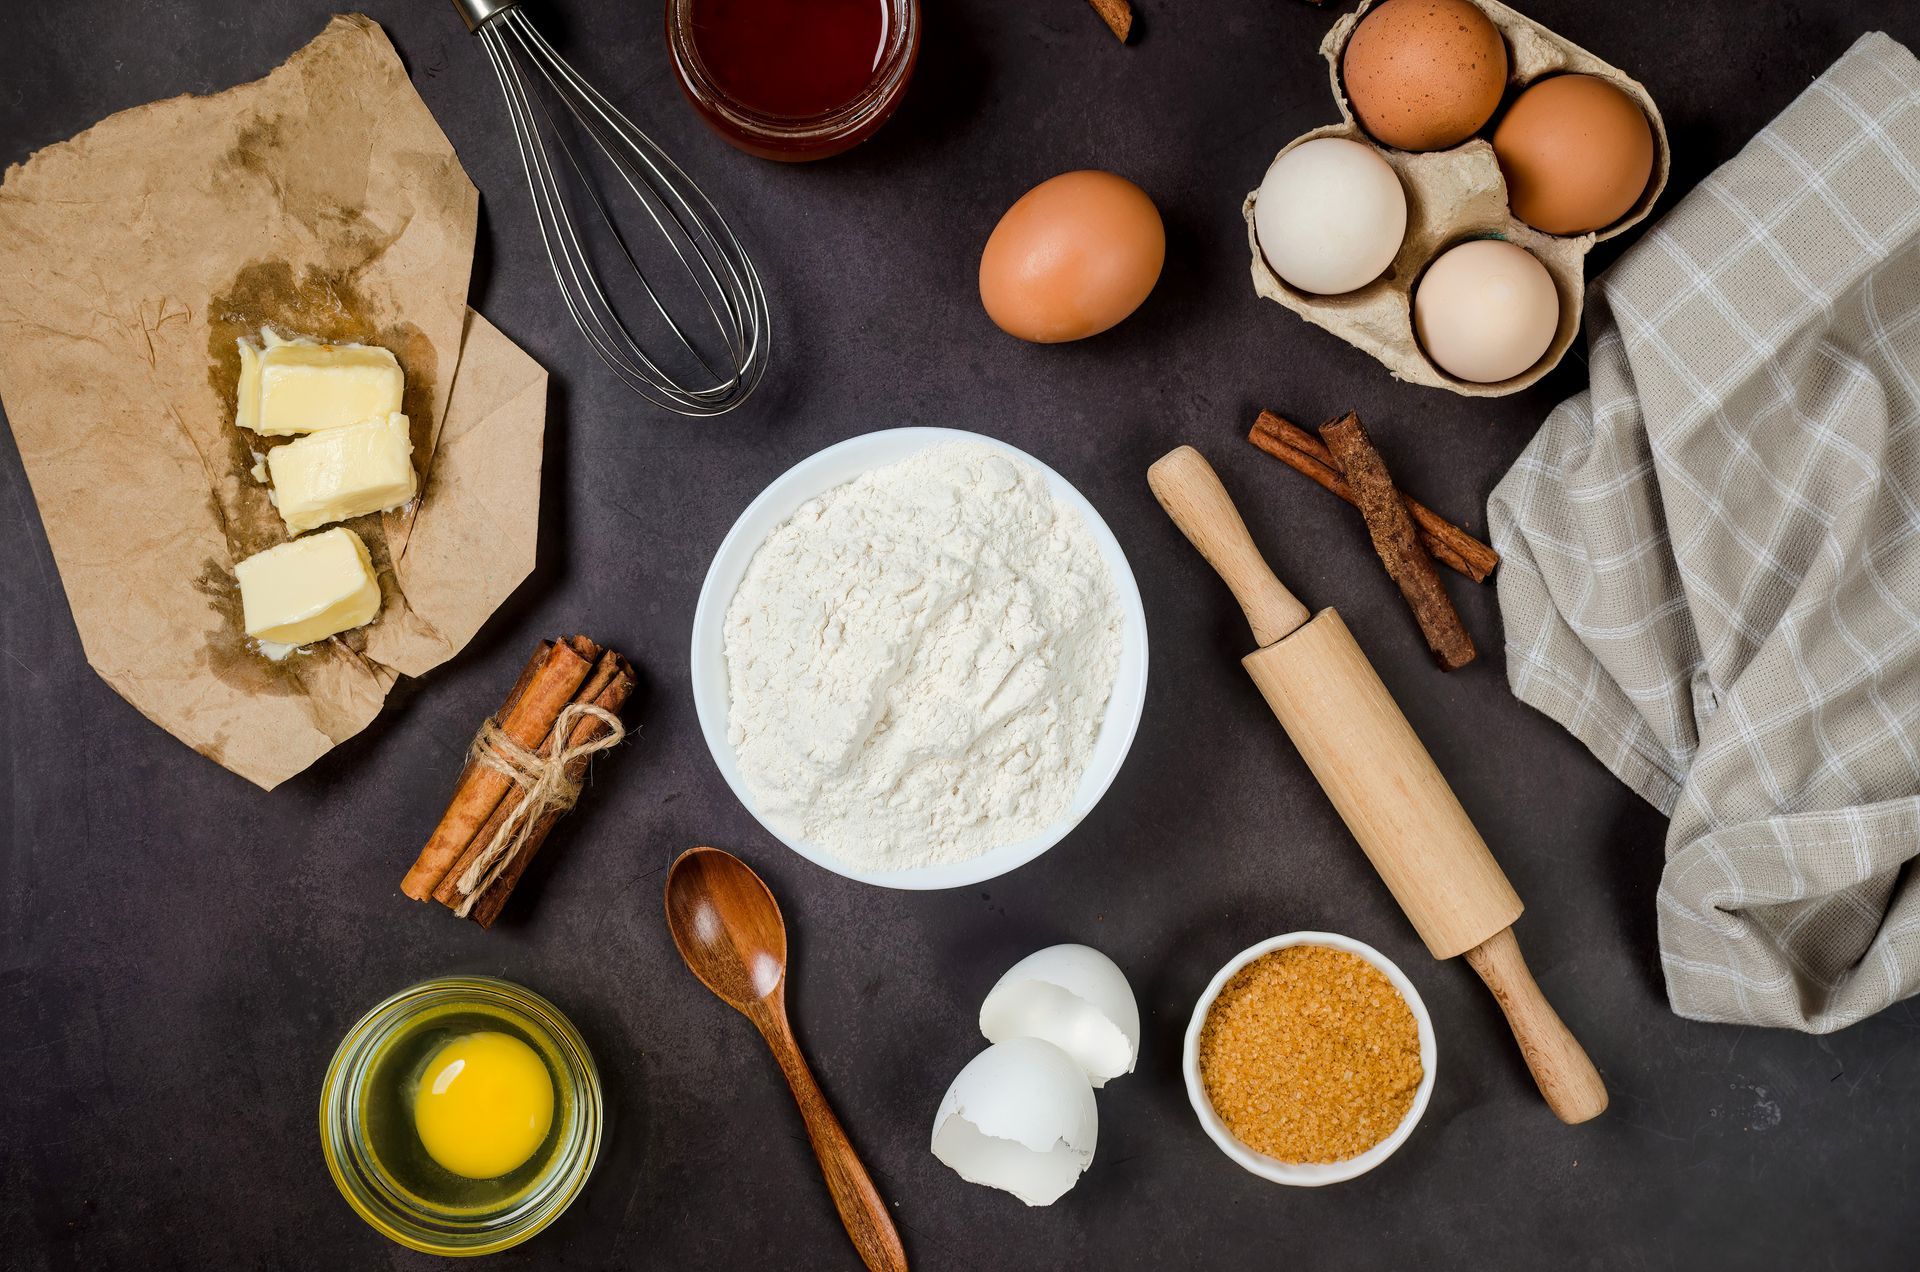 Ingredients for baking are laid out on a table including eggs , flour , butter and cinnamon sticks.